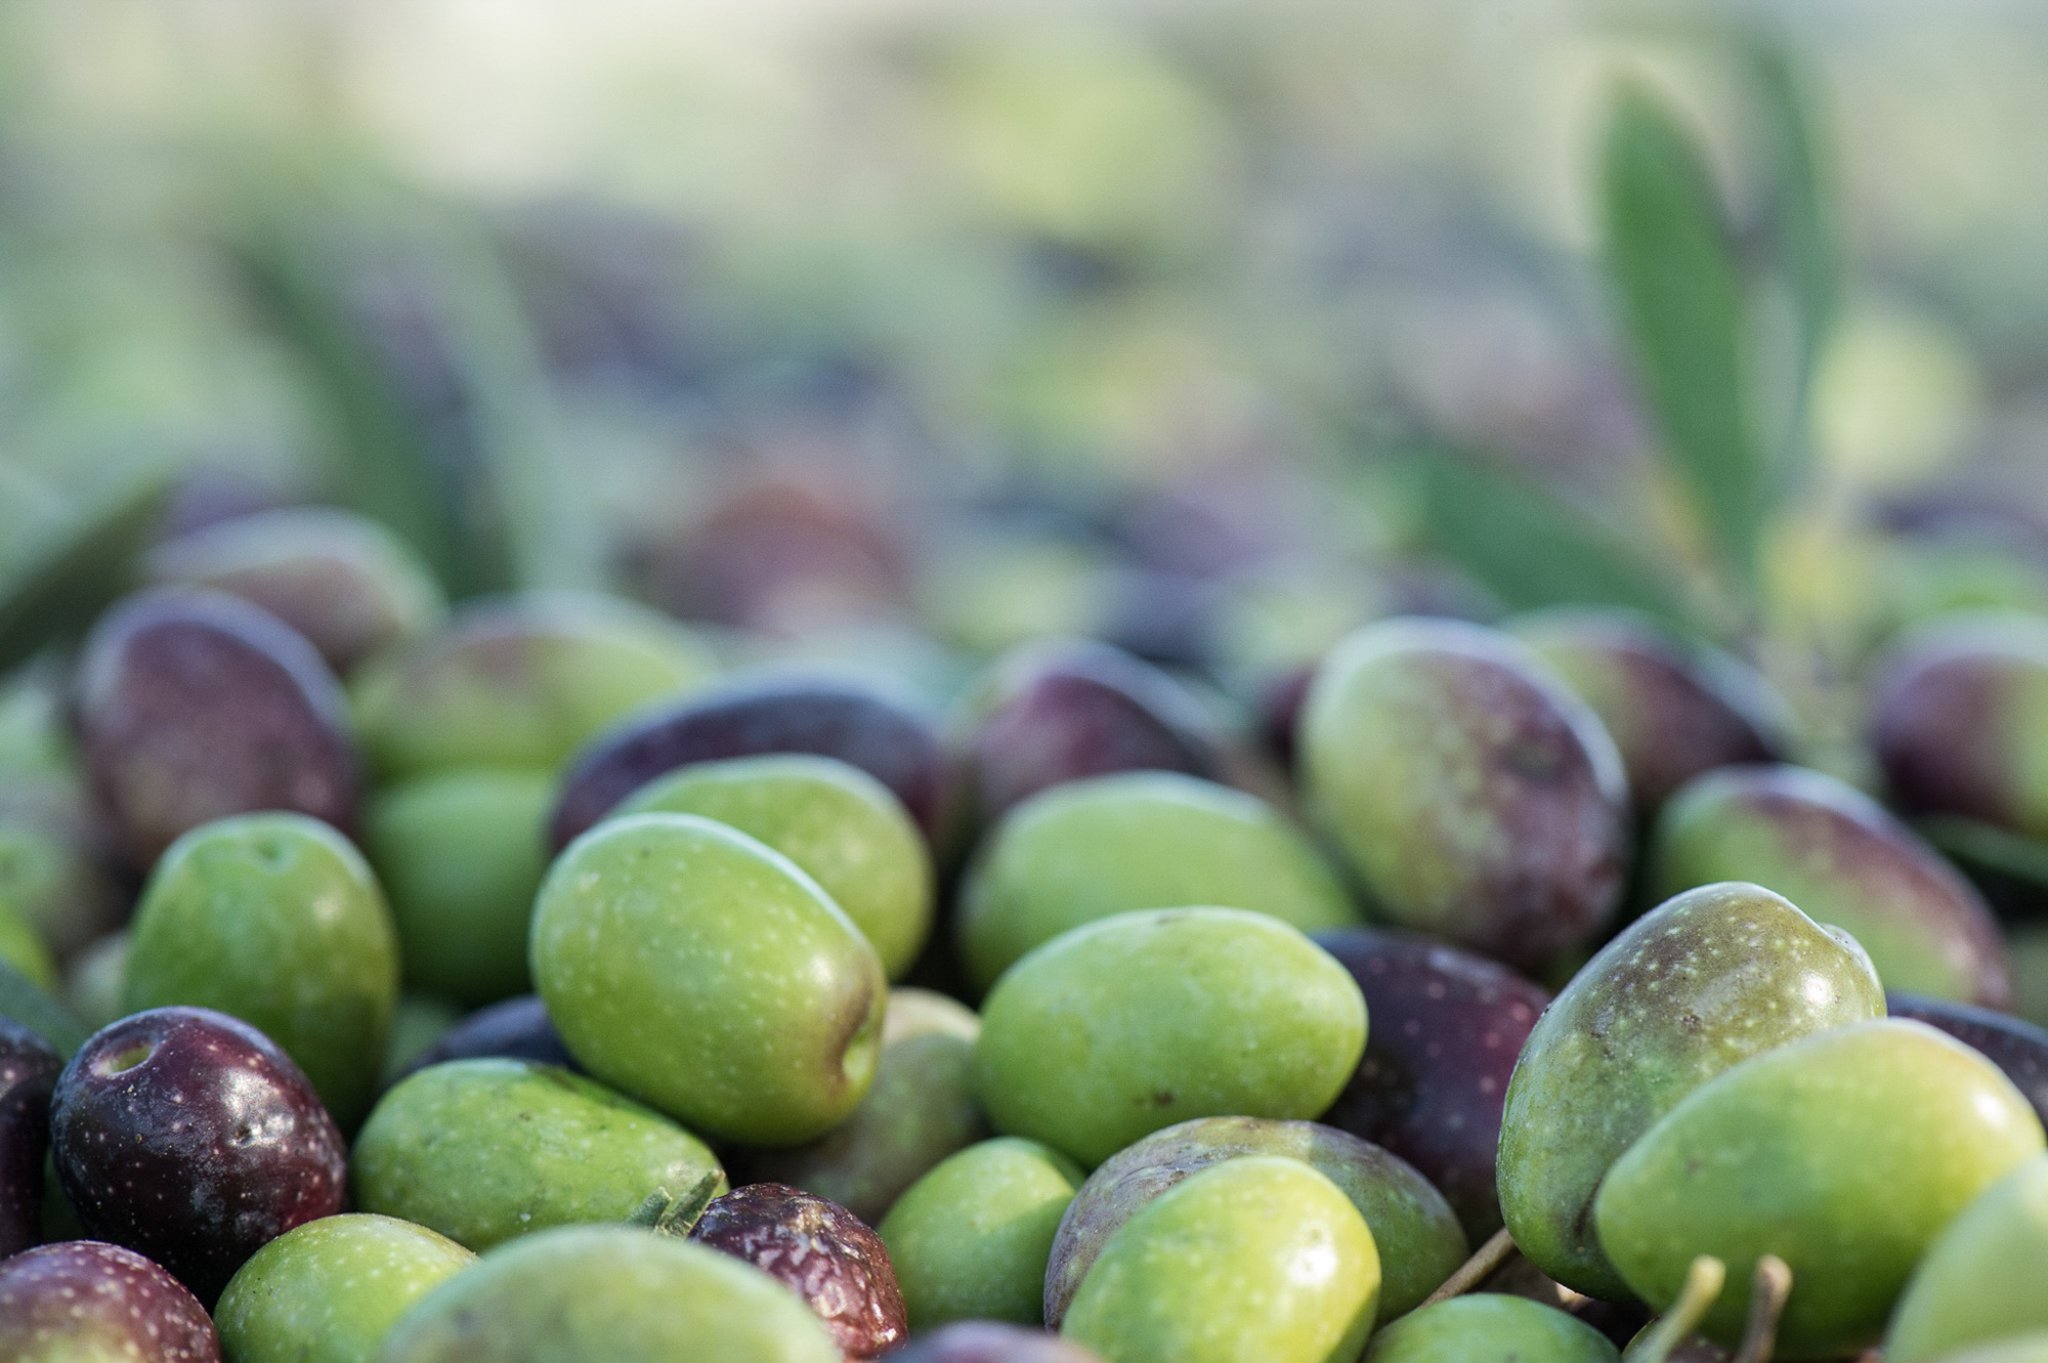 Are olives dyed to make them black? — The Olive Oil Source